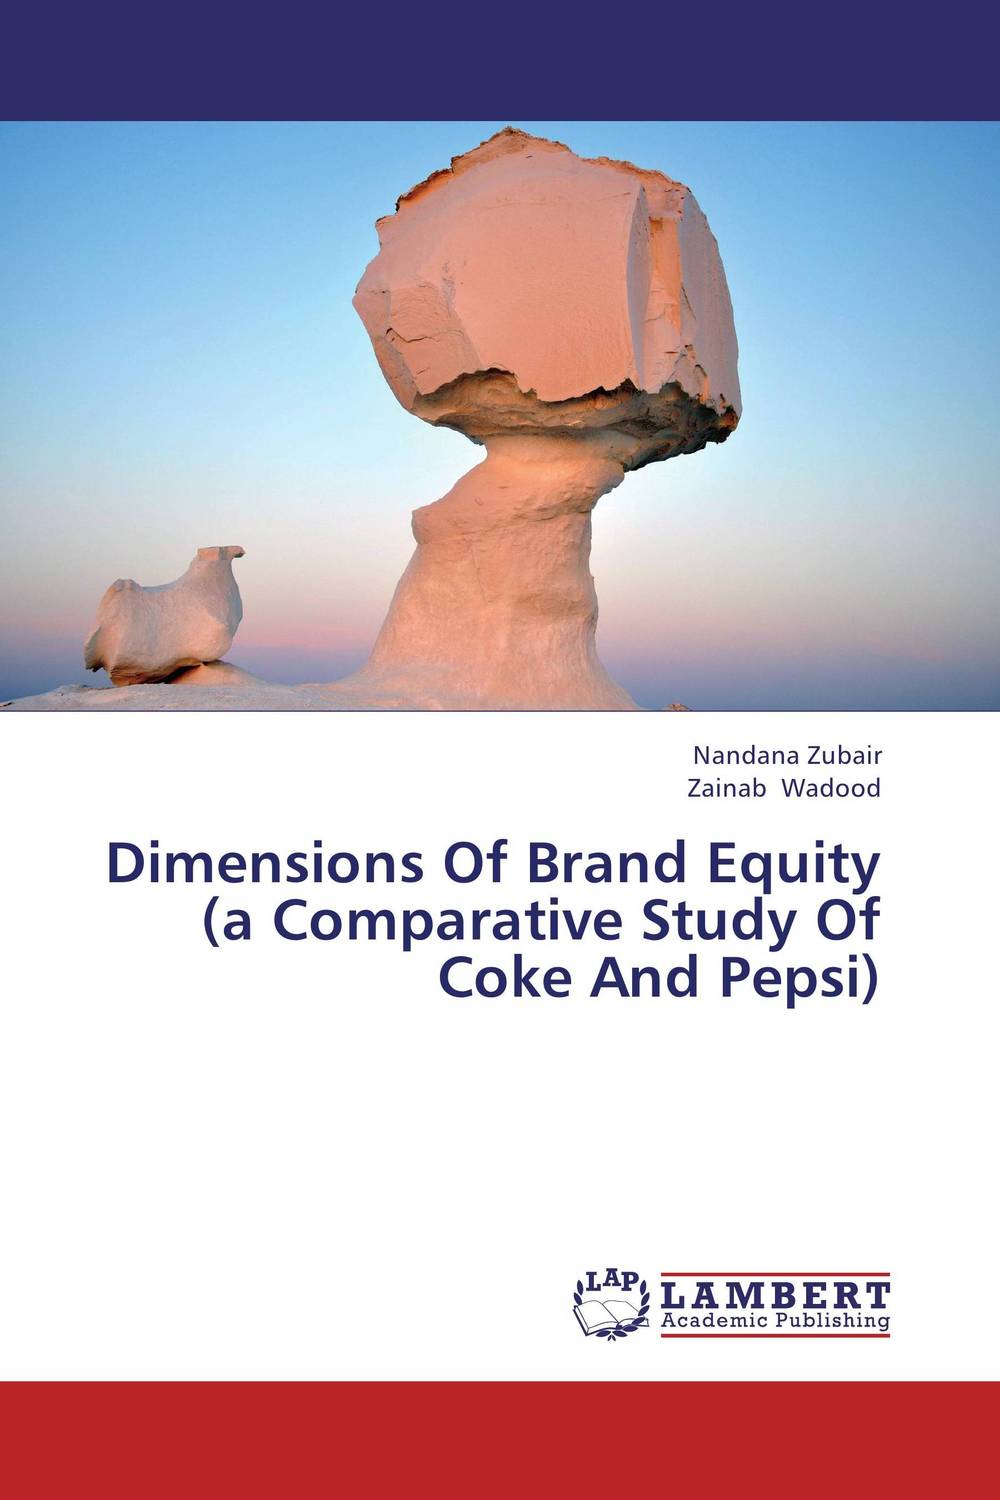 Dimensions Of Brand Equity (a Comparative Study Of Coke And Pepsi)